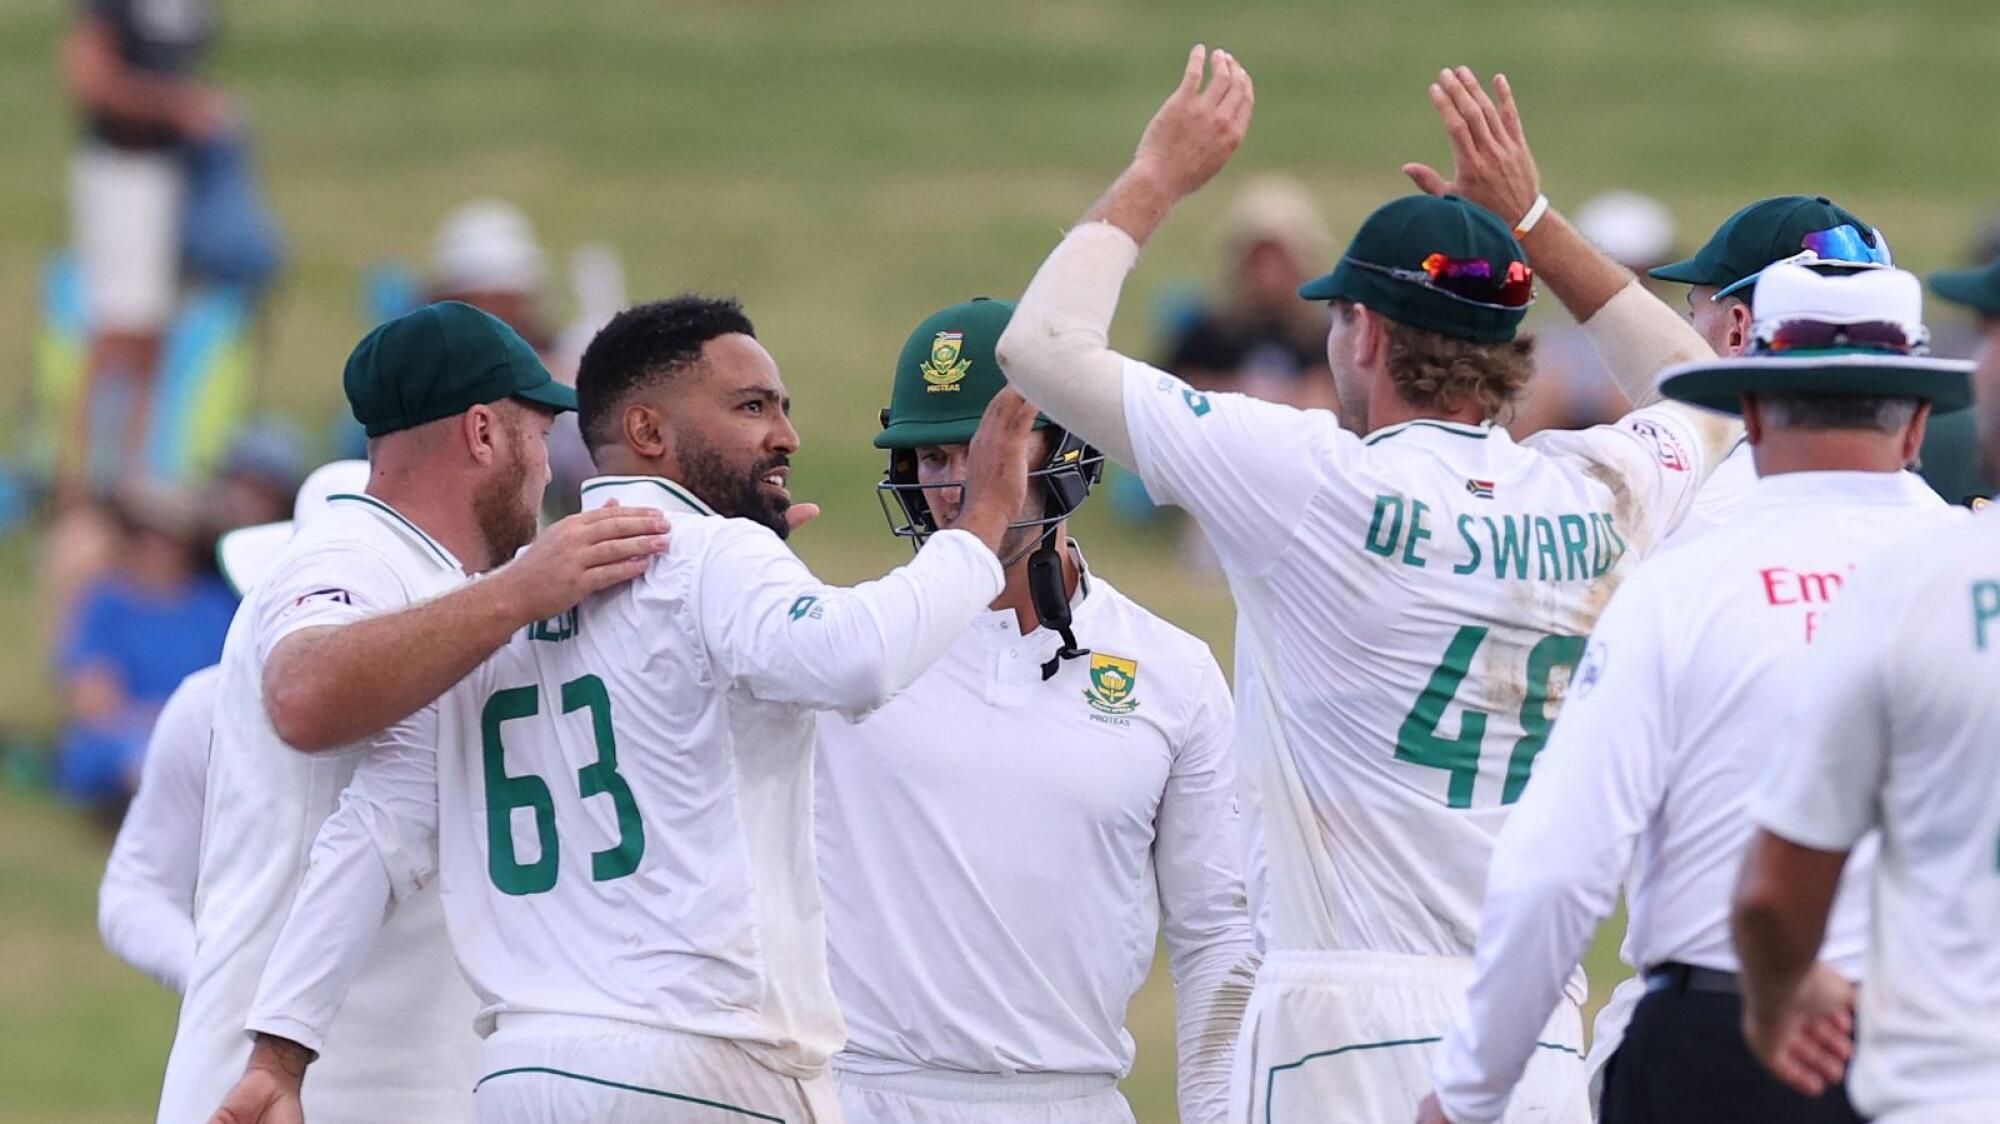 Proteas off-spinner Dane Piedt celebrates his fifth wicket against New Zealand with his teammates.